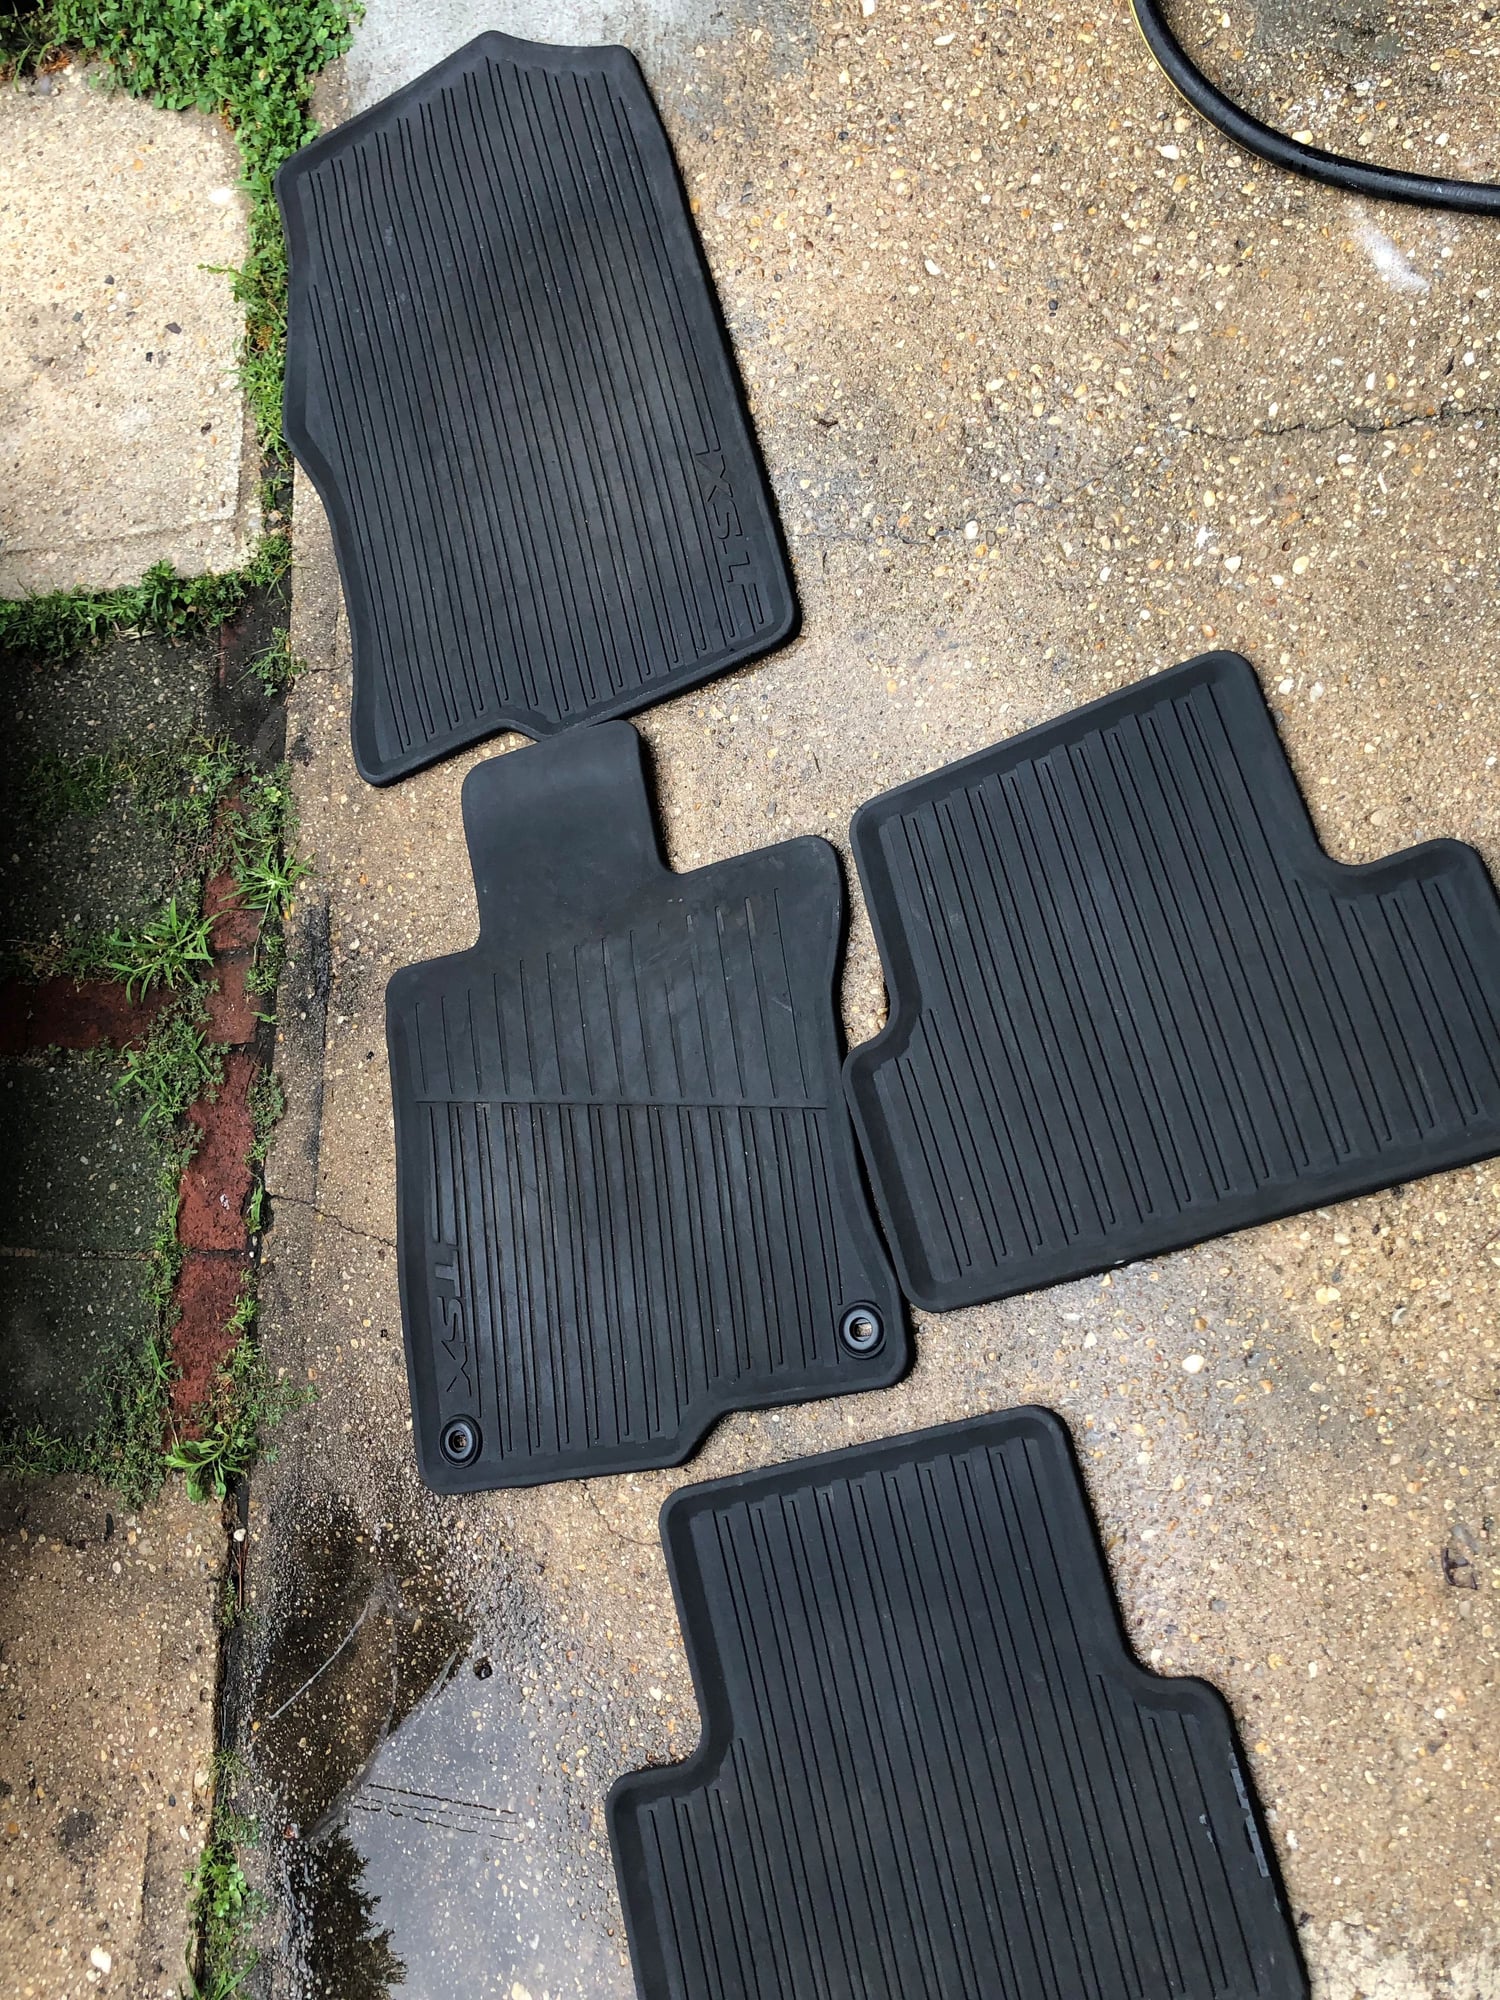 Interior/Upholstery - SOLD: OEM 2G TSX all weather mats front&rear - Used - 2009 to 2014 Acura TSX - Flushing, NY 11358, United States